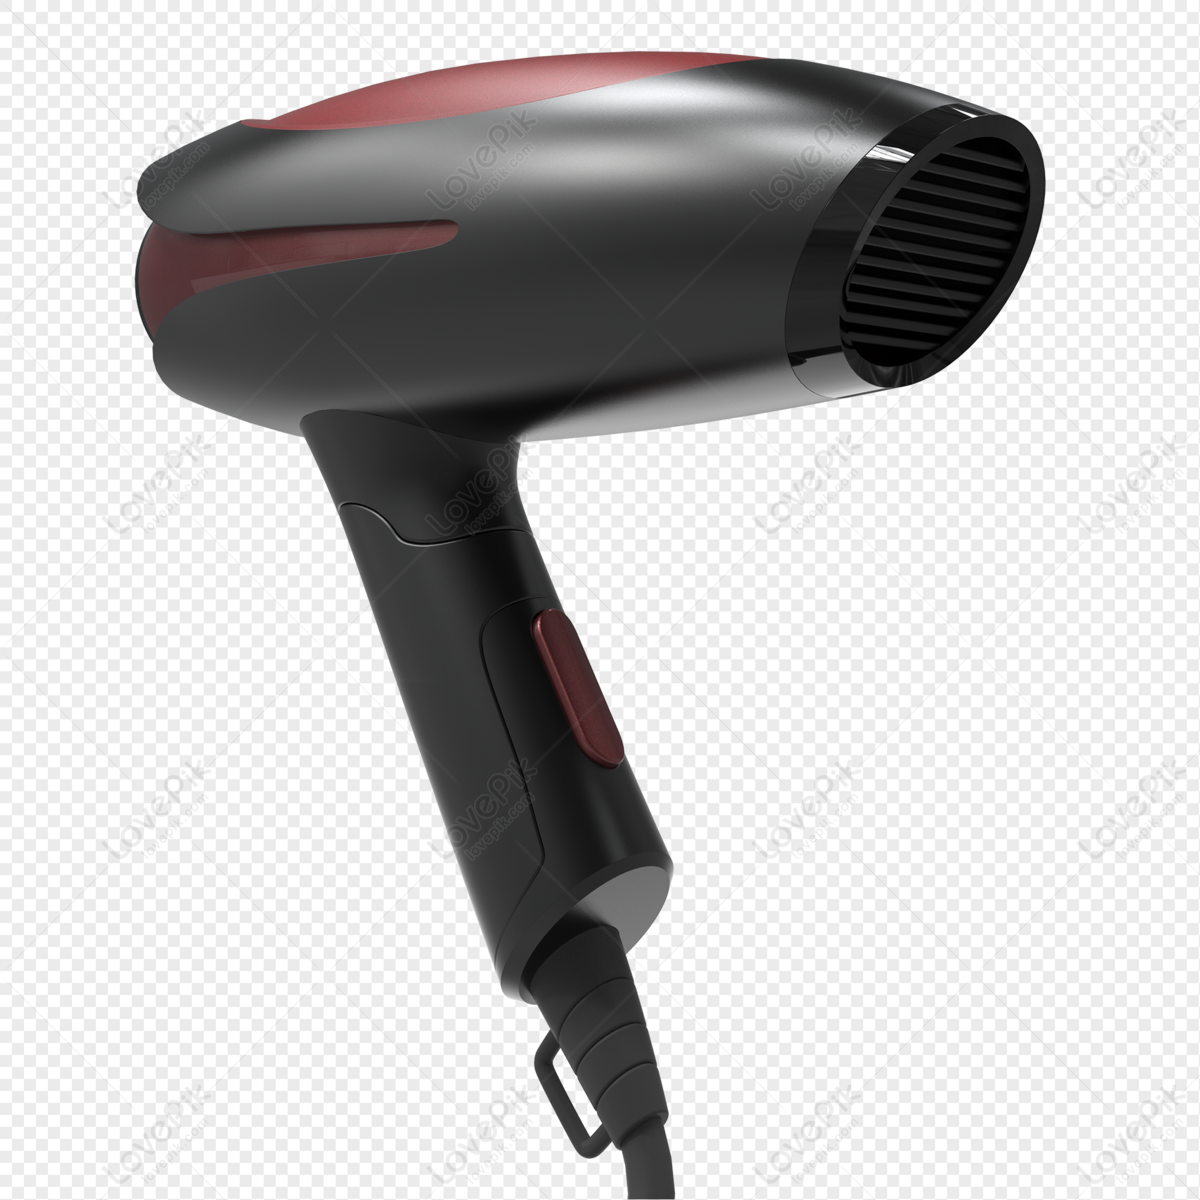 Rhino Modeling Hair Dryer PNG Transparent Background And Clipart Image For  Free Download - Lovepik | 401778840